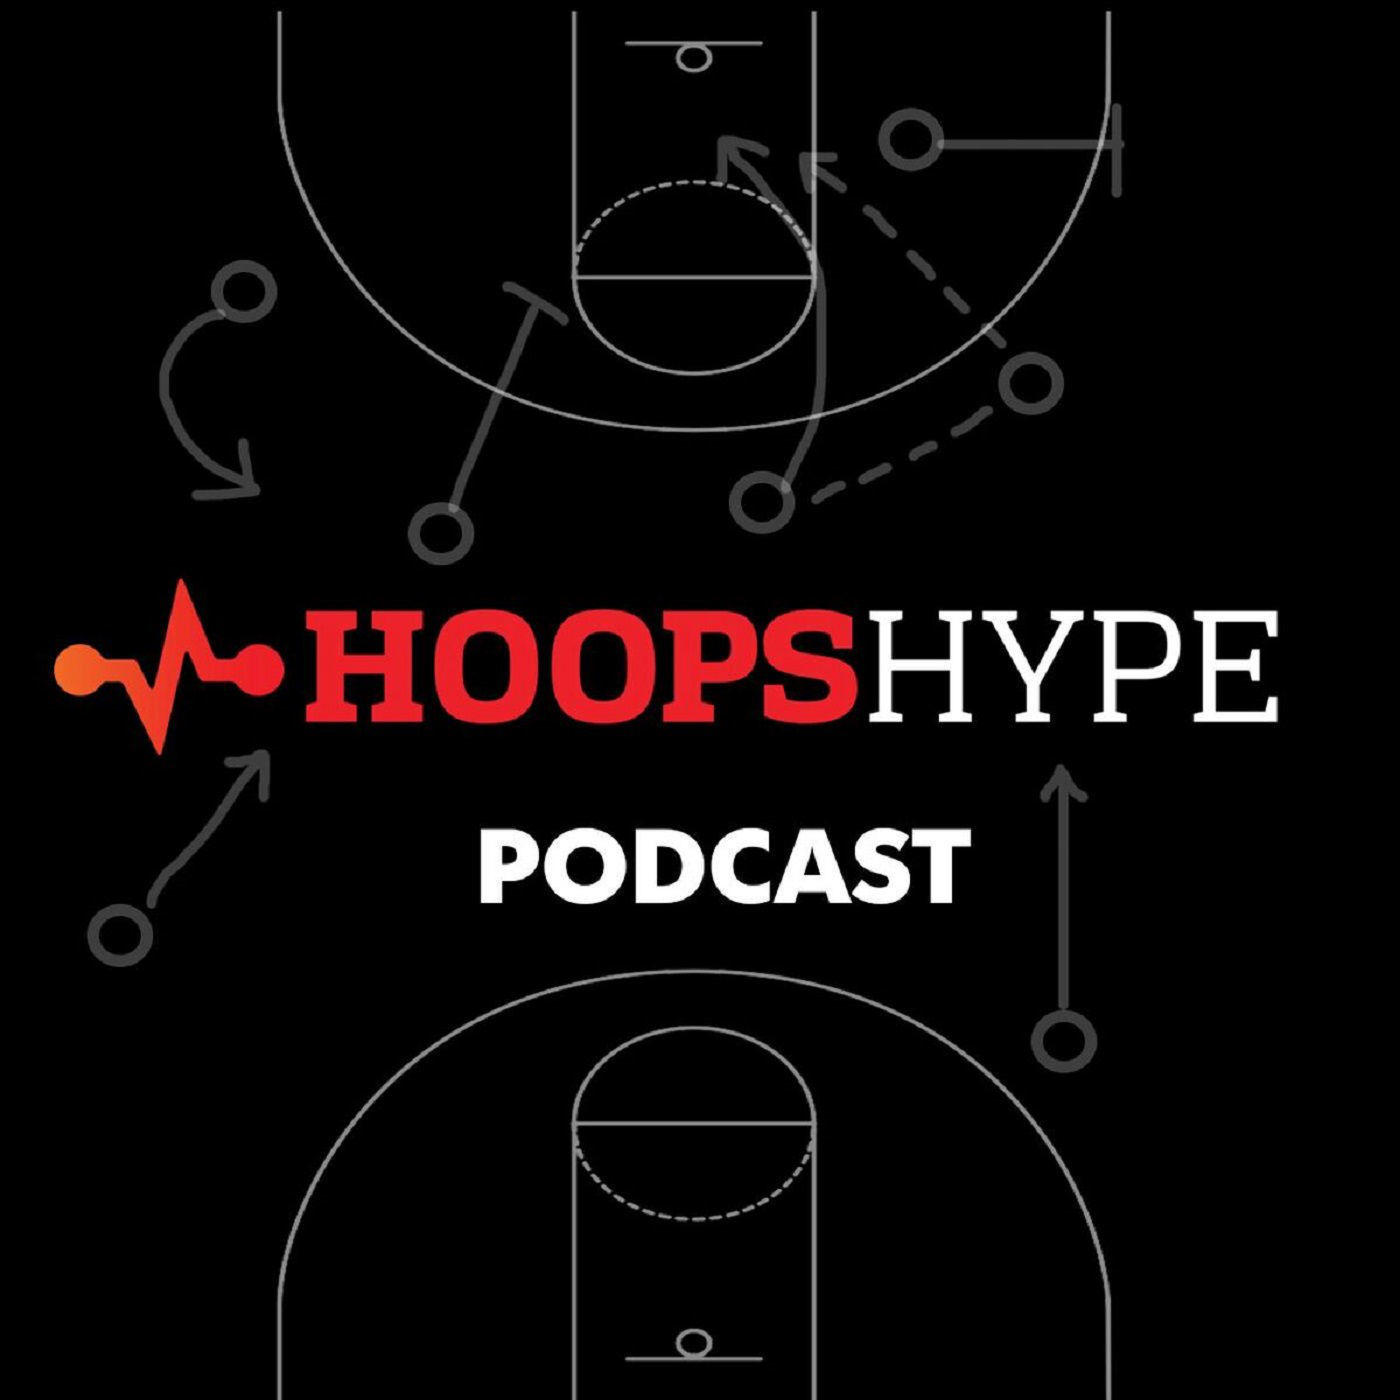 John Collins on Trade Rumors, Extension Talks With the Hawks, Recruiting Free Agents and More